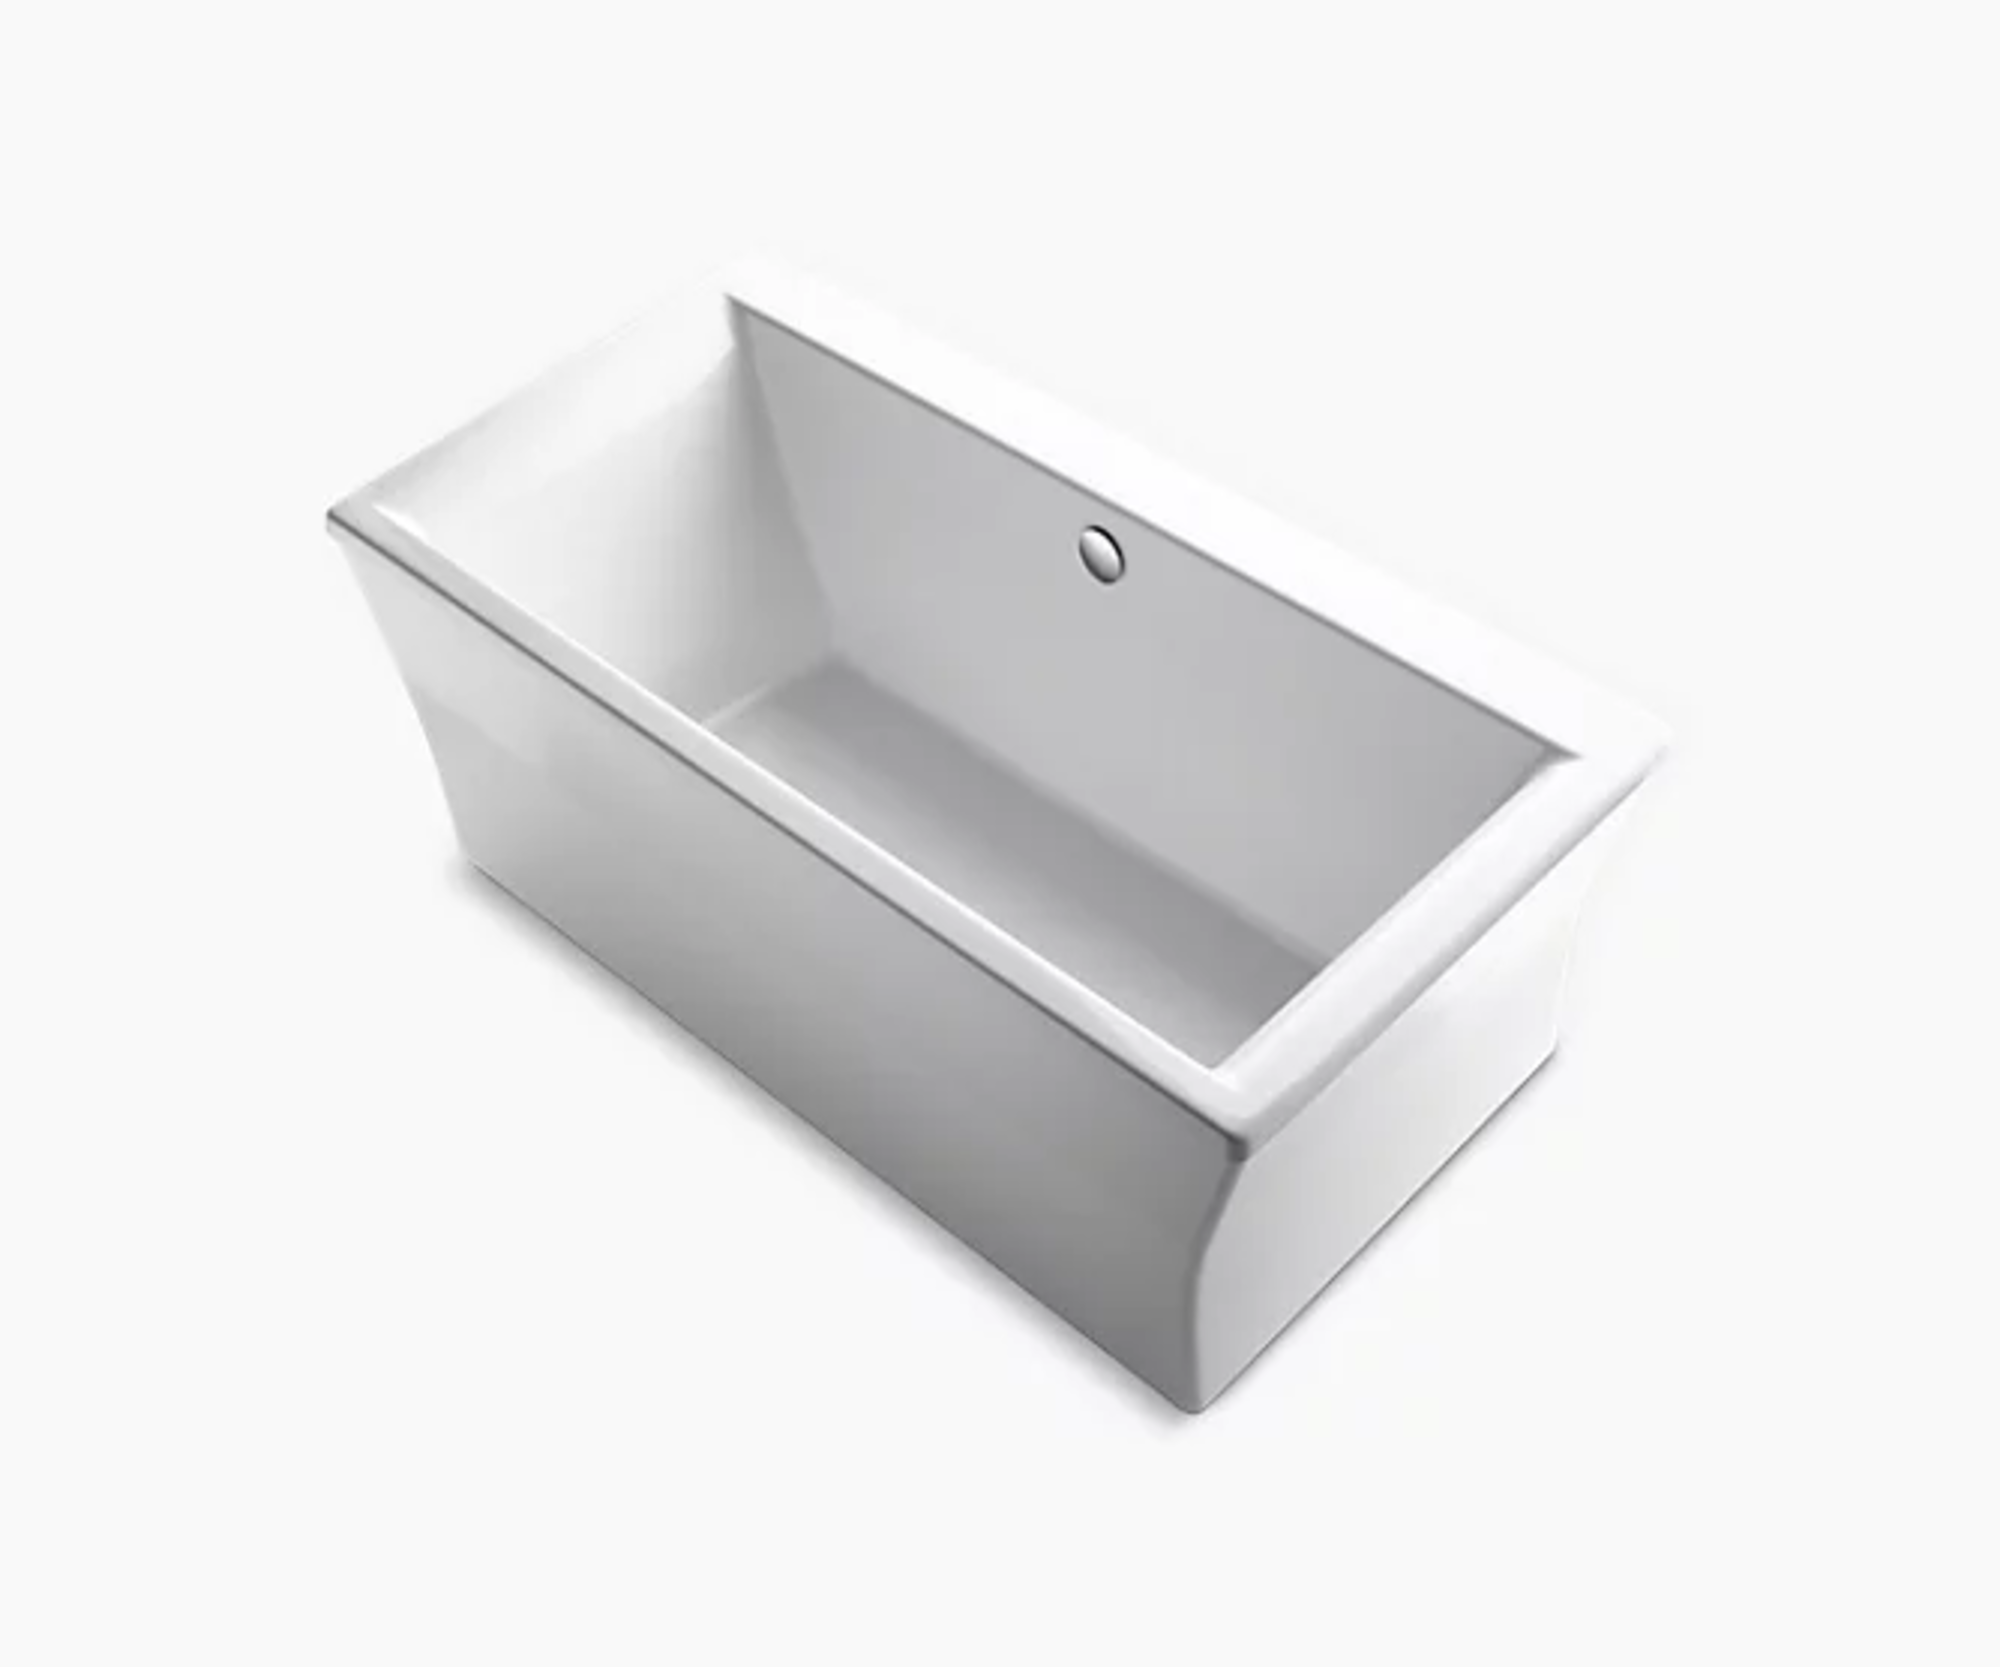 72" x 36" freestanding bath with fluted-main